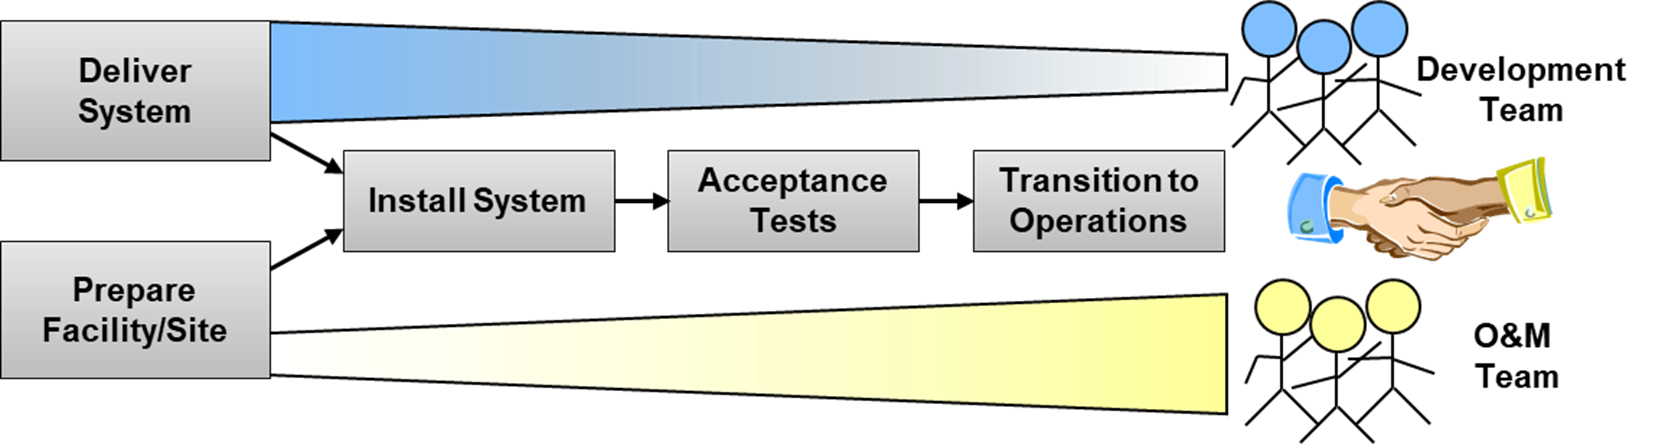 Figure shows the steps in transitioning from development to operations and maintenance.  Deliver system and prep facility.  then Install system, run acceptance tests and finally transition to operations.